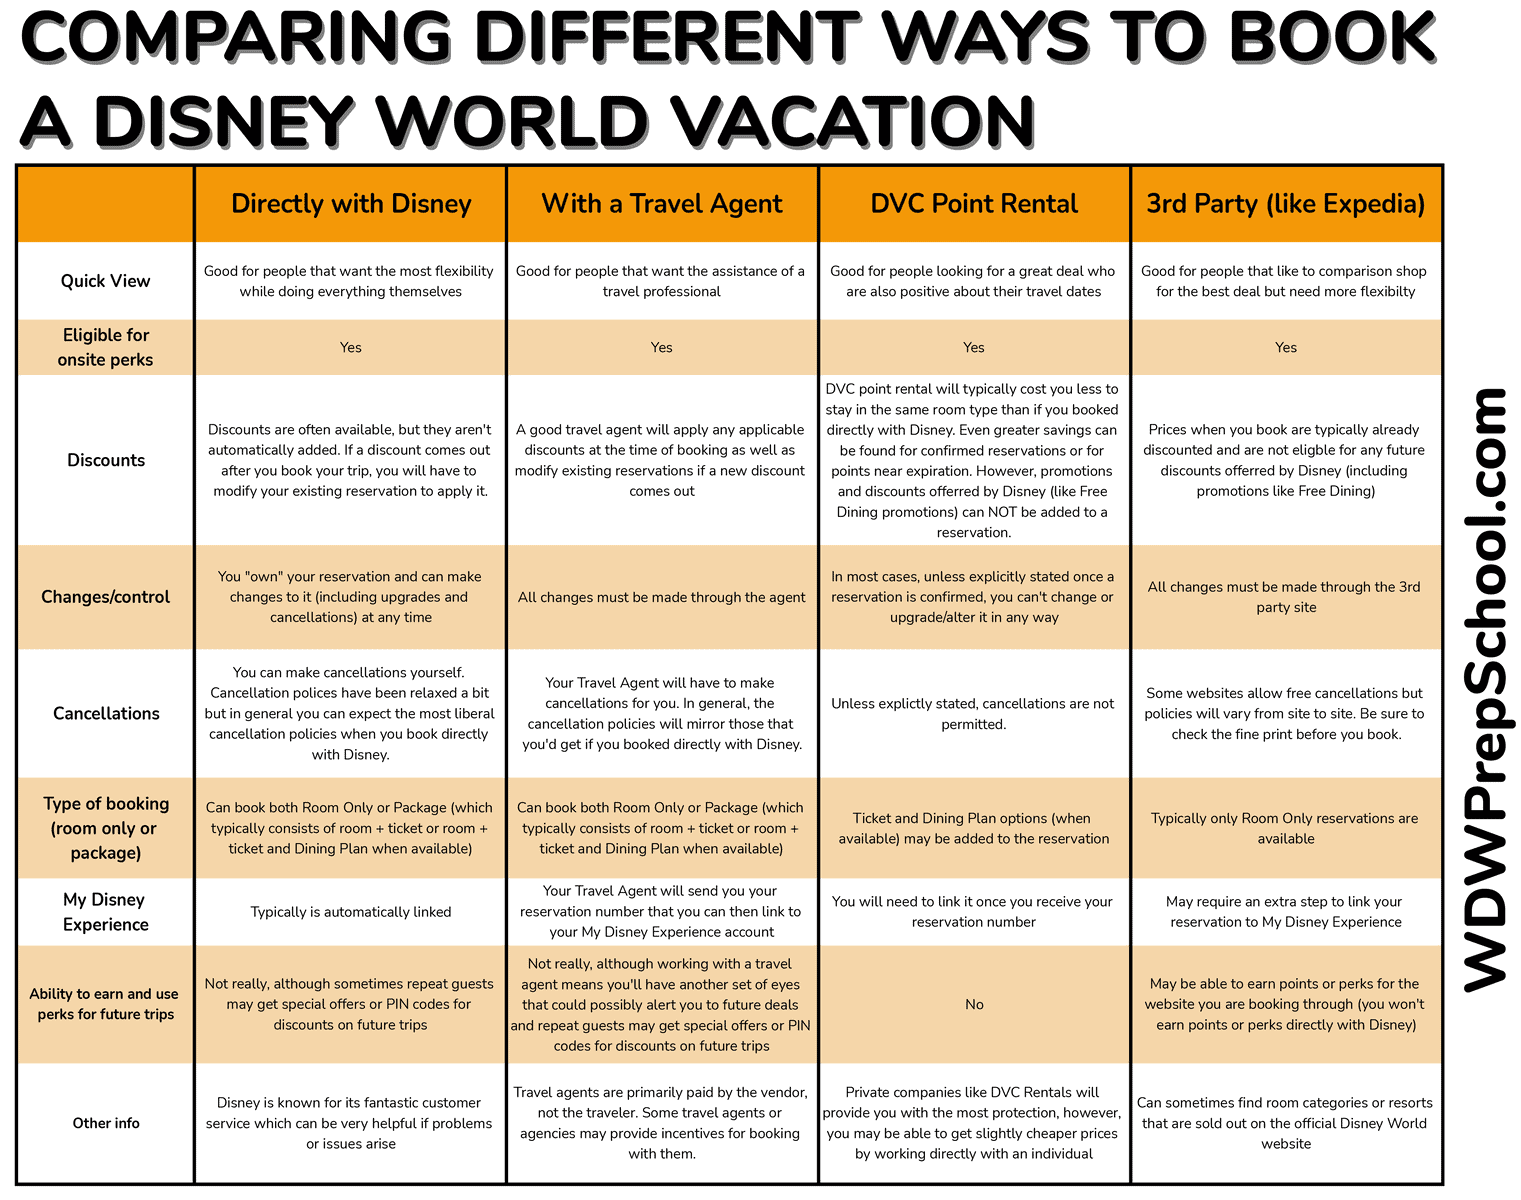 Comparison chart for different ways to book